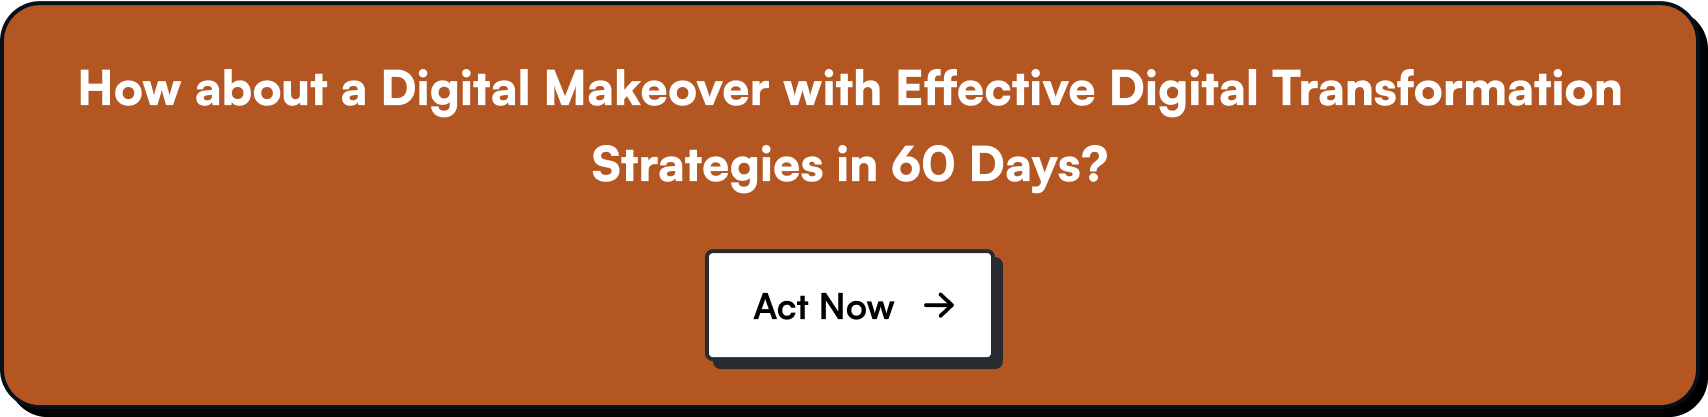 How about a Digital Makeover with Effective Digital Transformation Strategies in 60 Days_